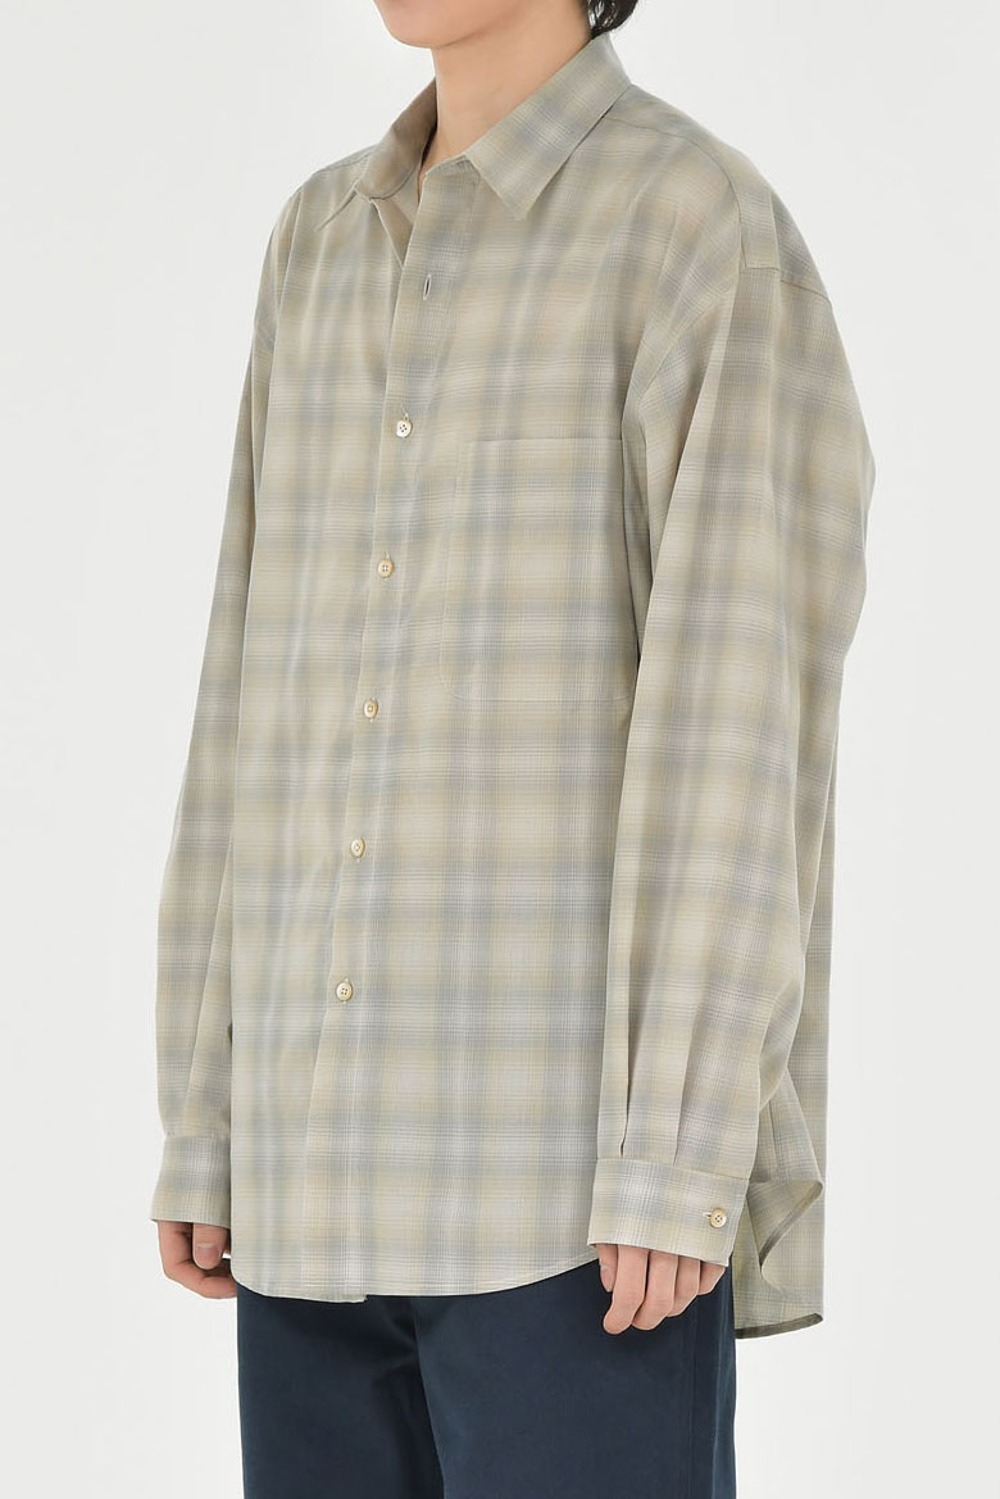 Steady Shirt-Ombre Stone